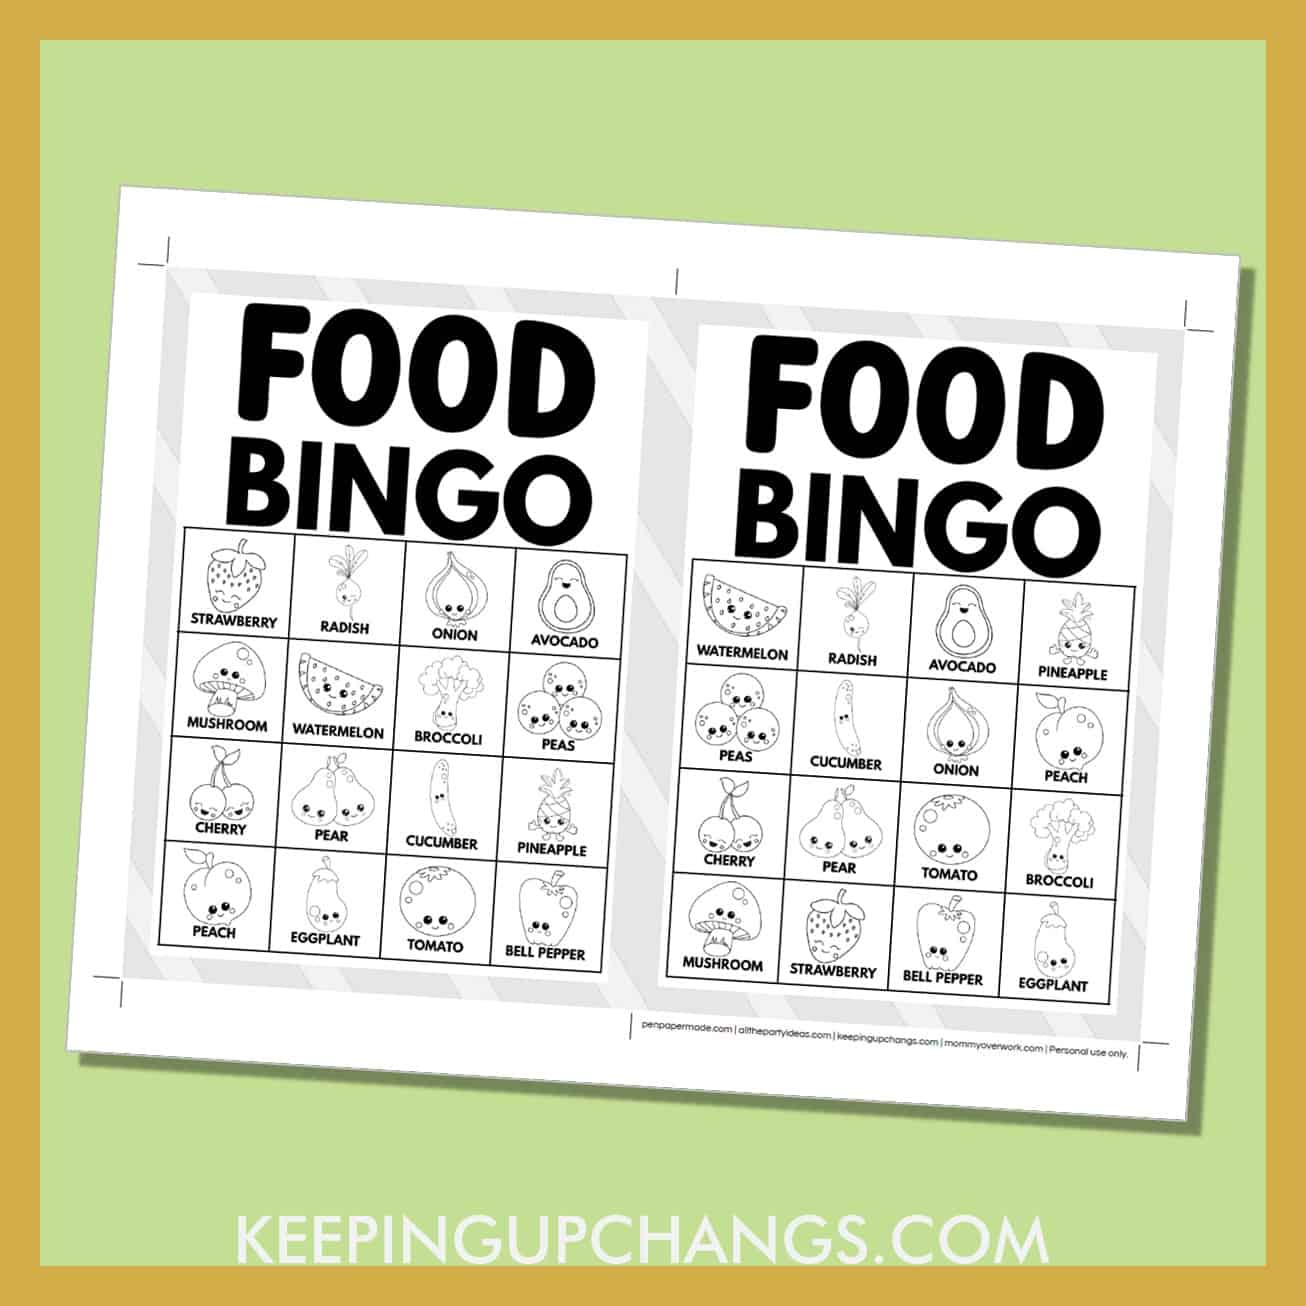 free food bingo card 4x4 5x7 game boards with black, white images and text words.